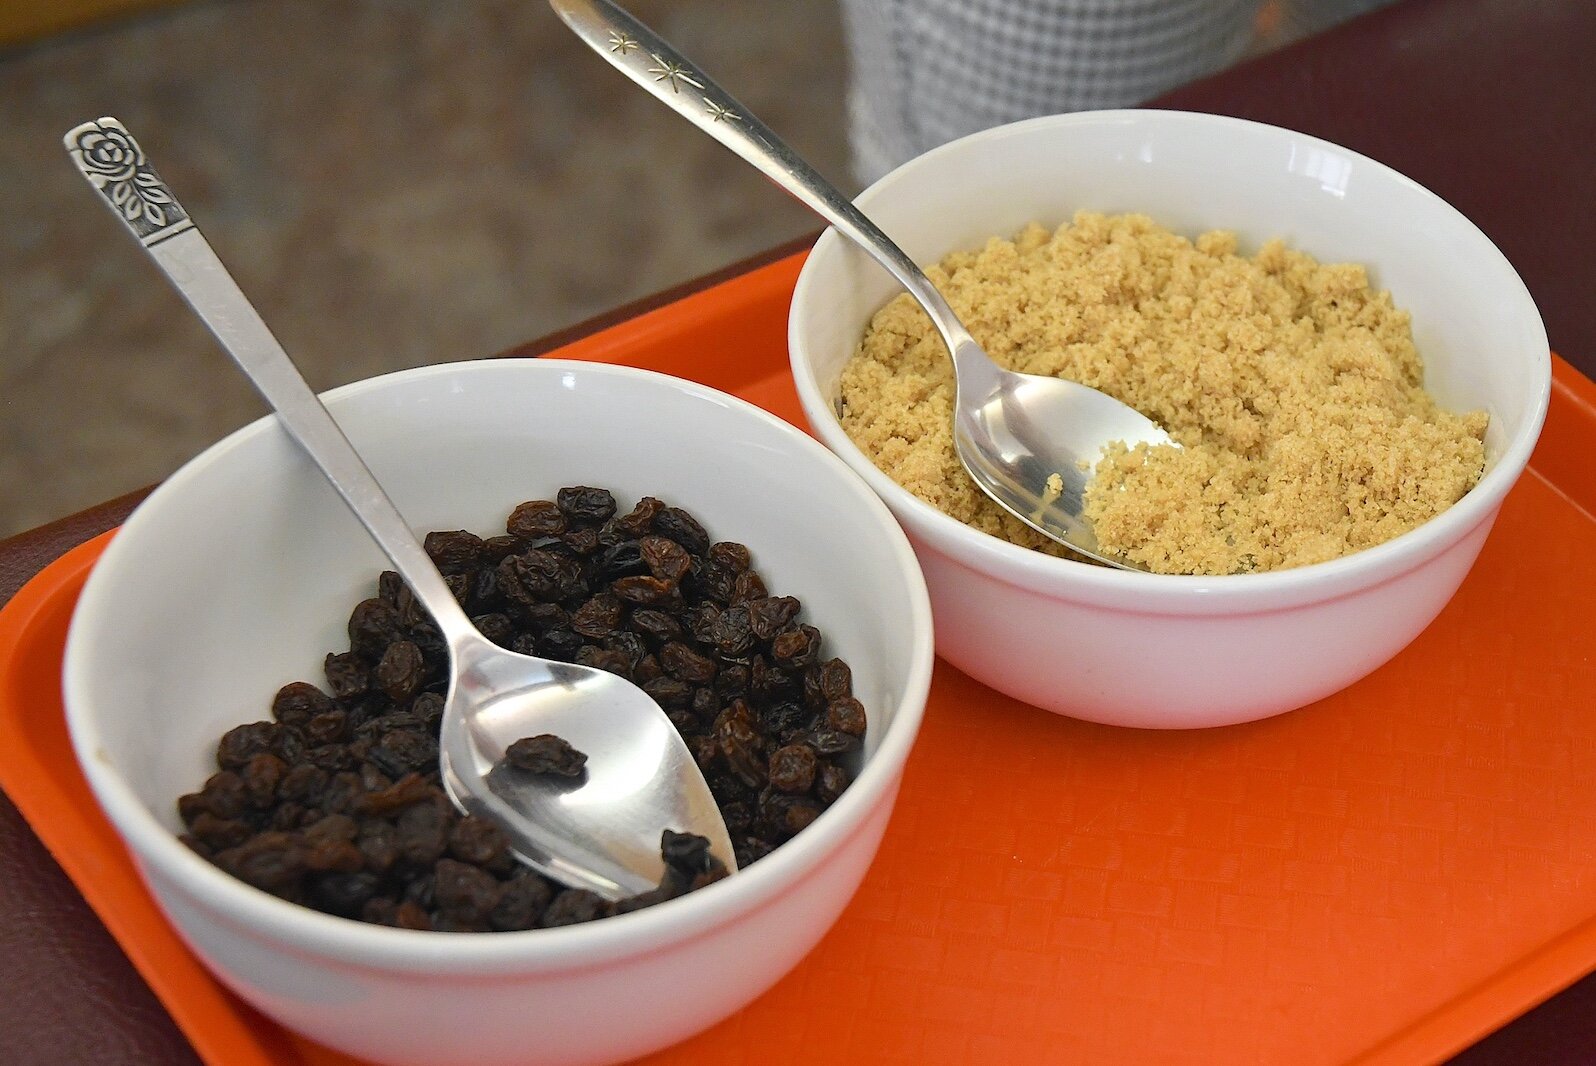 Raisins and brown sugar are available to mix with oatmeal at St. Thomas Episcopal Church’s breakfast program.